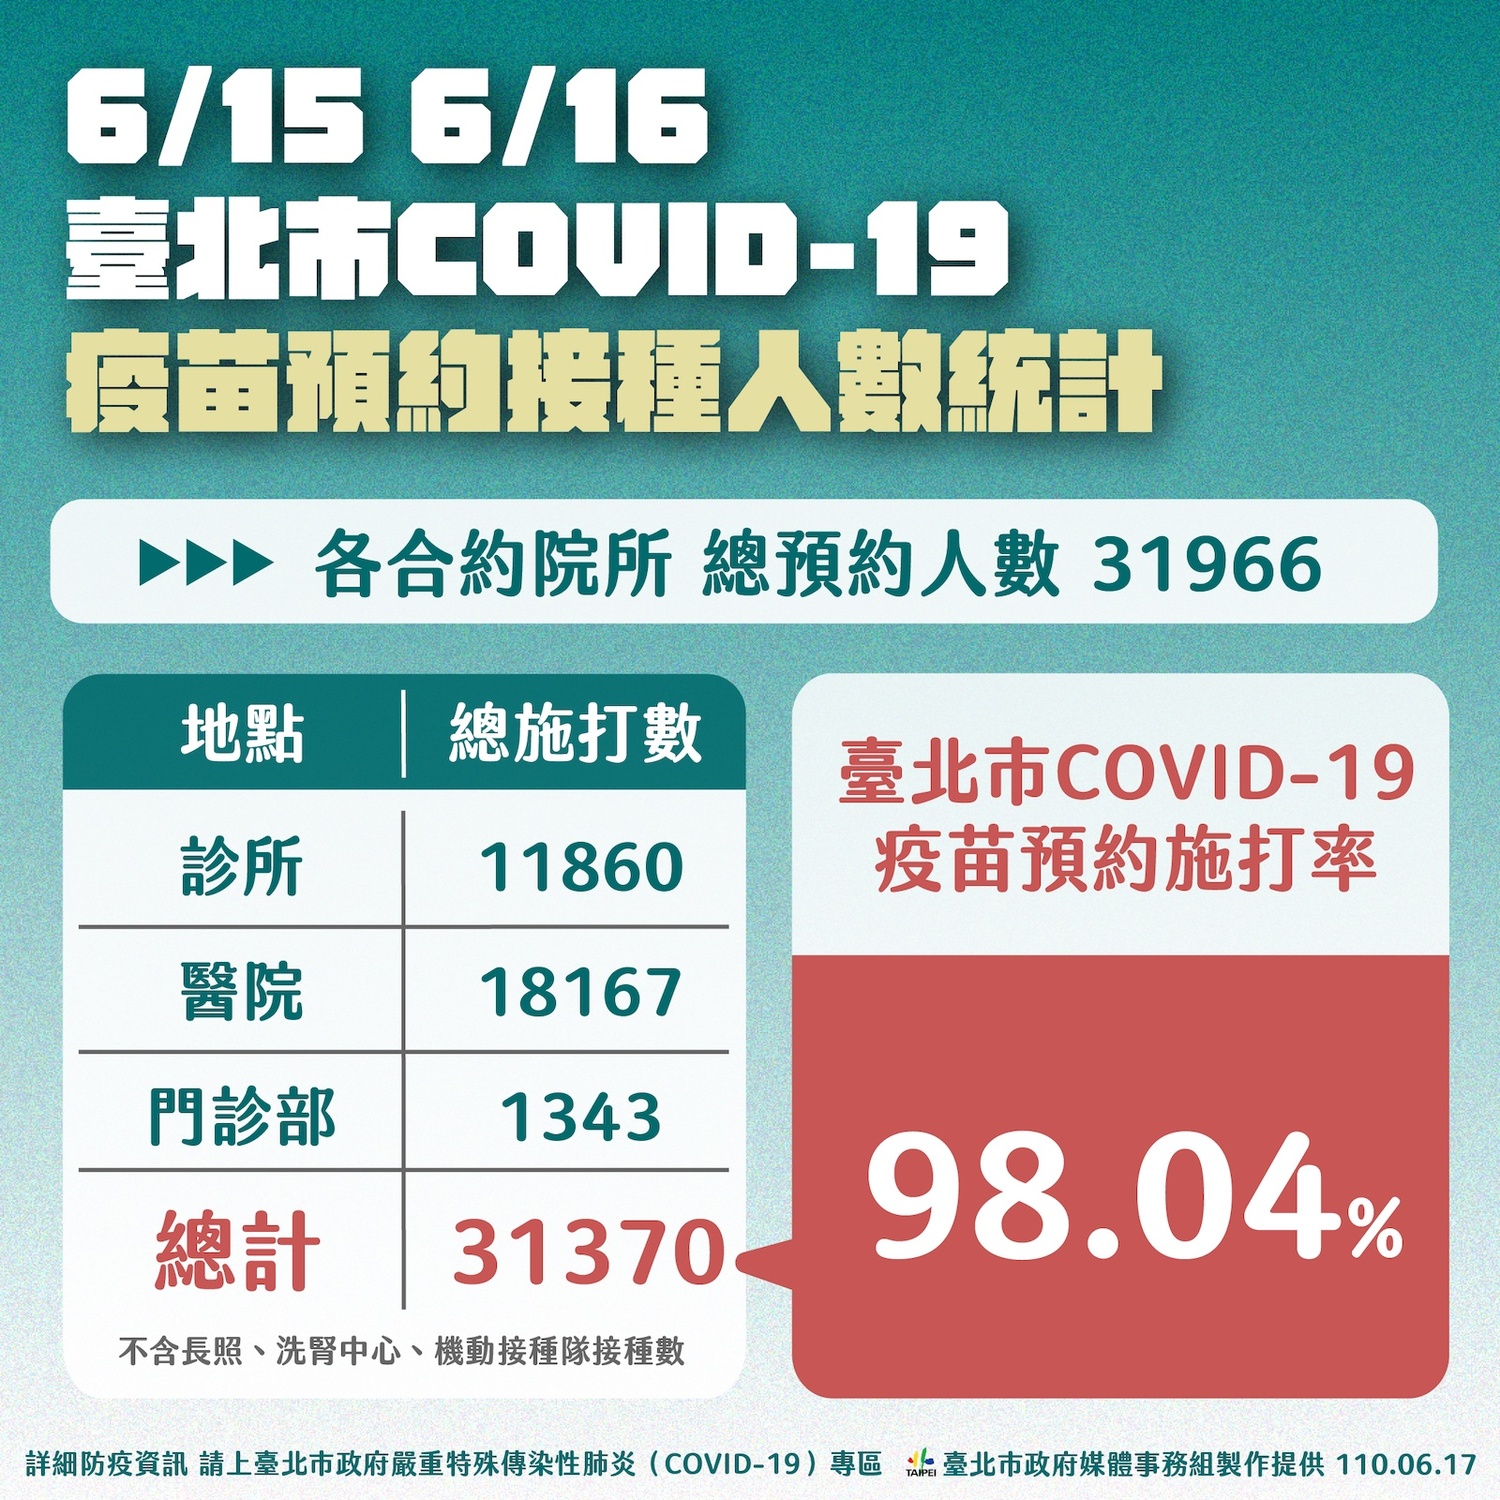 According to Taipei City Mayor Ko Wen-Zhe, there are up to 98.04% senior citizens vaccinated in the first wave of online booking system for vaccination. (Source from Taipei City Government, TCG)